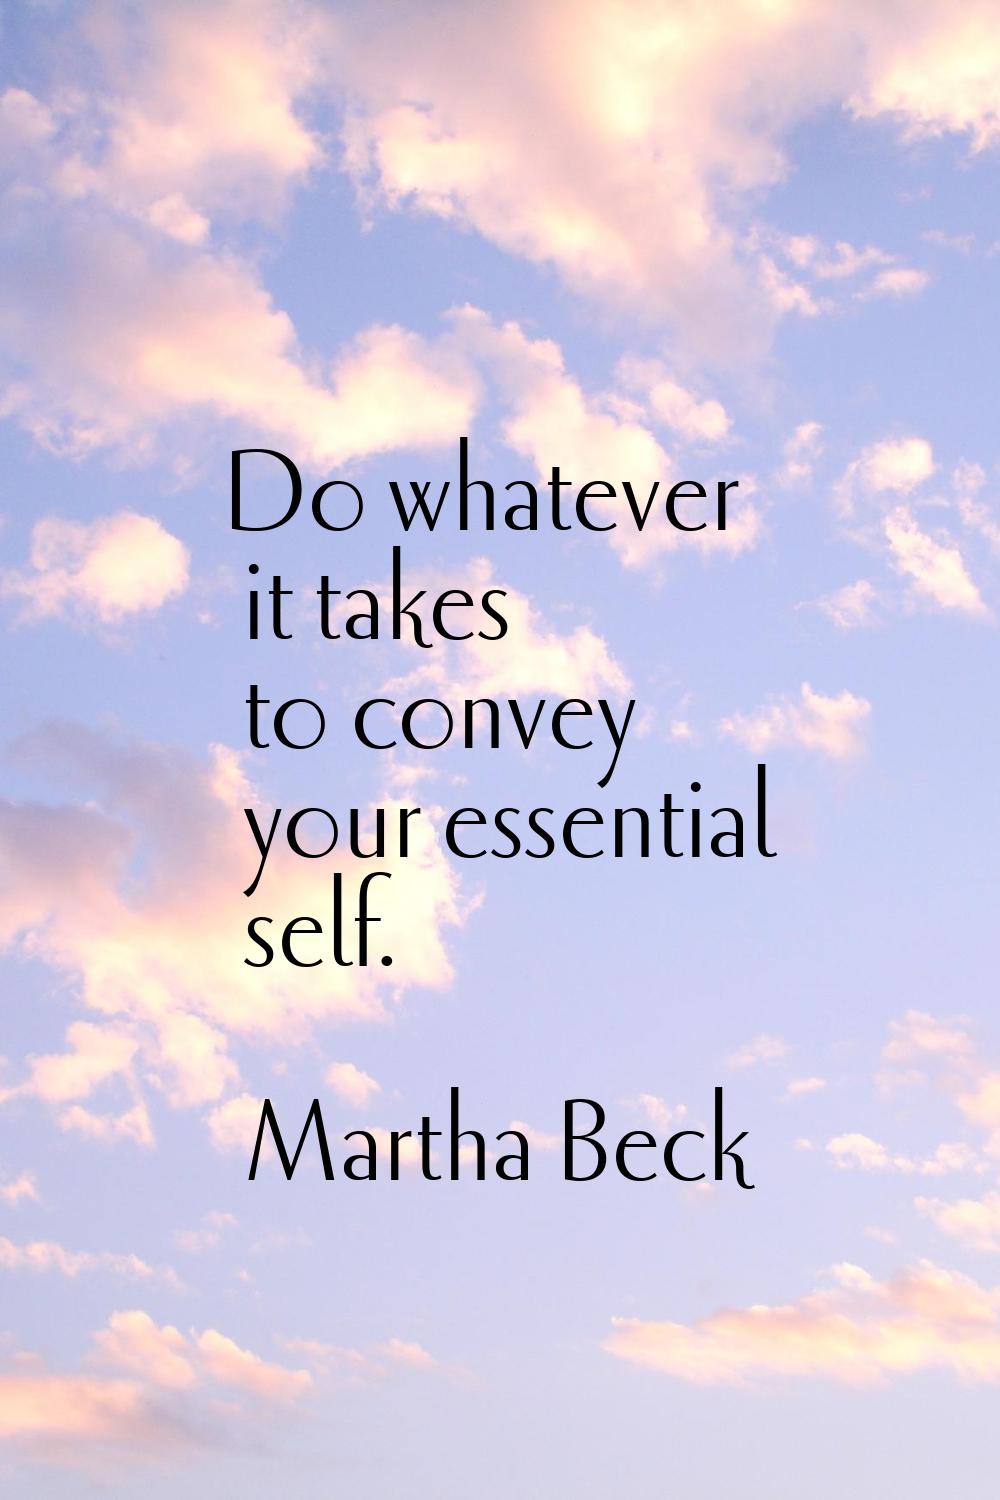 Do whatever it takes to convey your essential self.